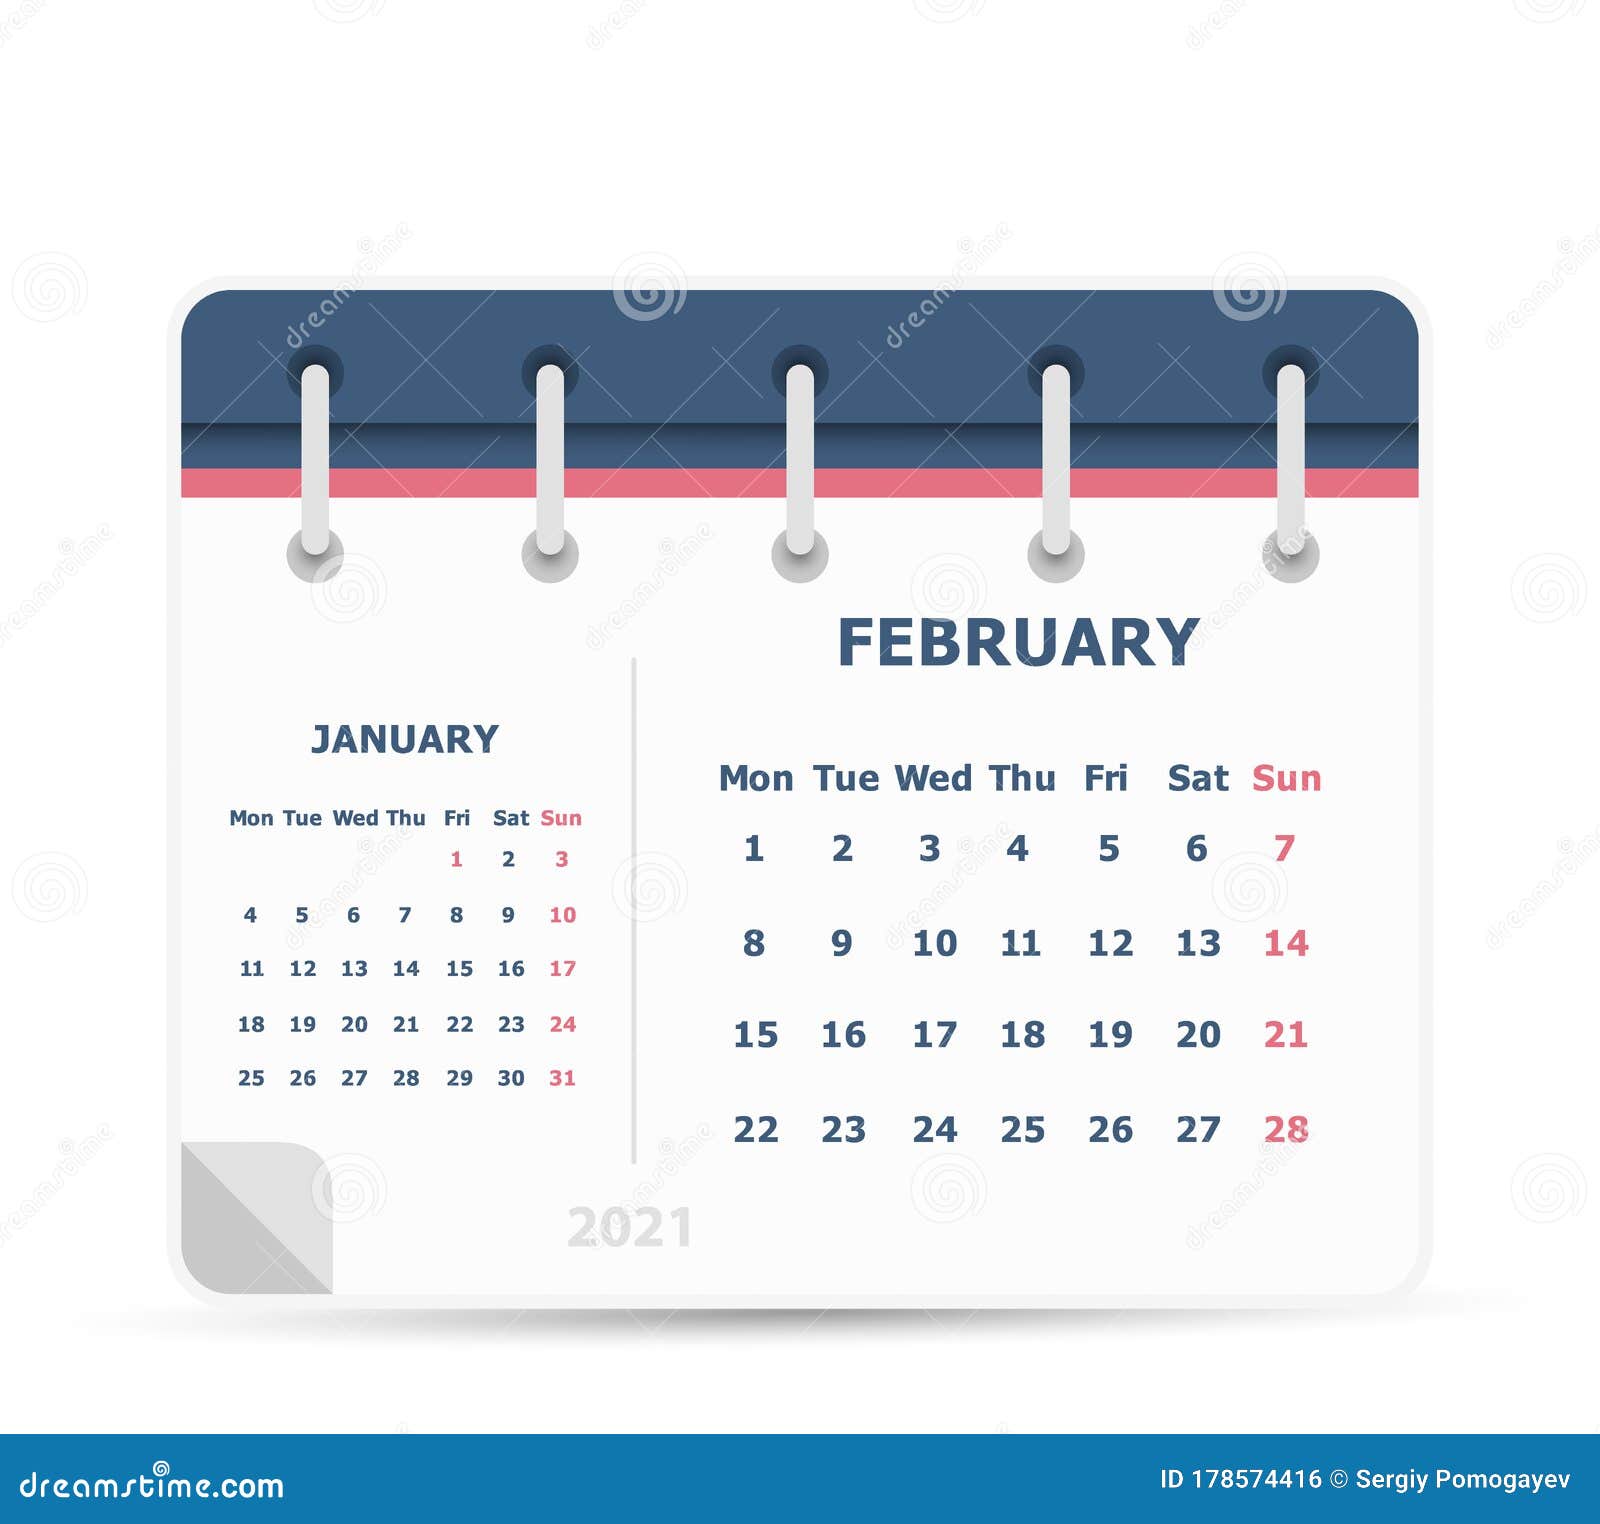 Featured image of post February 2021 Calendar Graphic / Download february 2021 calendar as html, excel xlsx, word docx, pdf or picture.